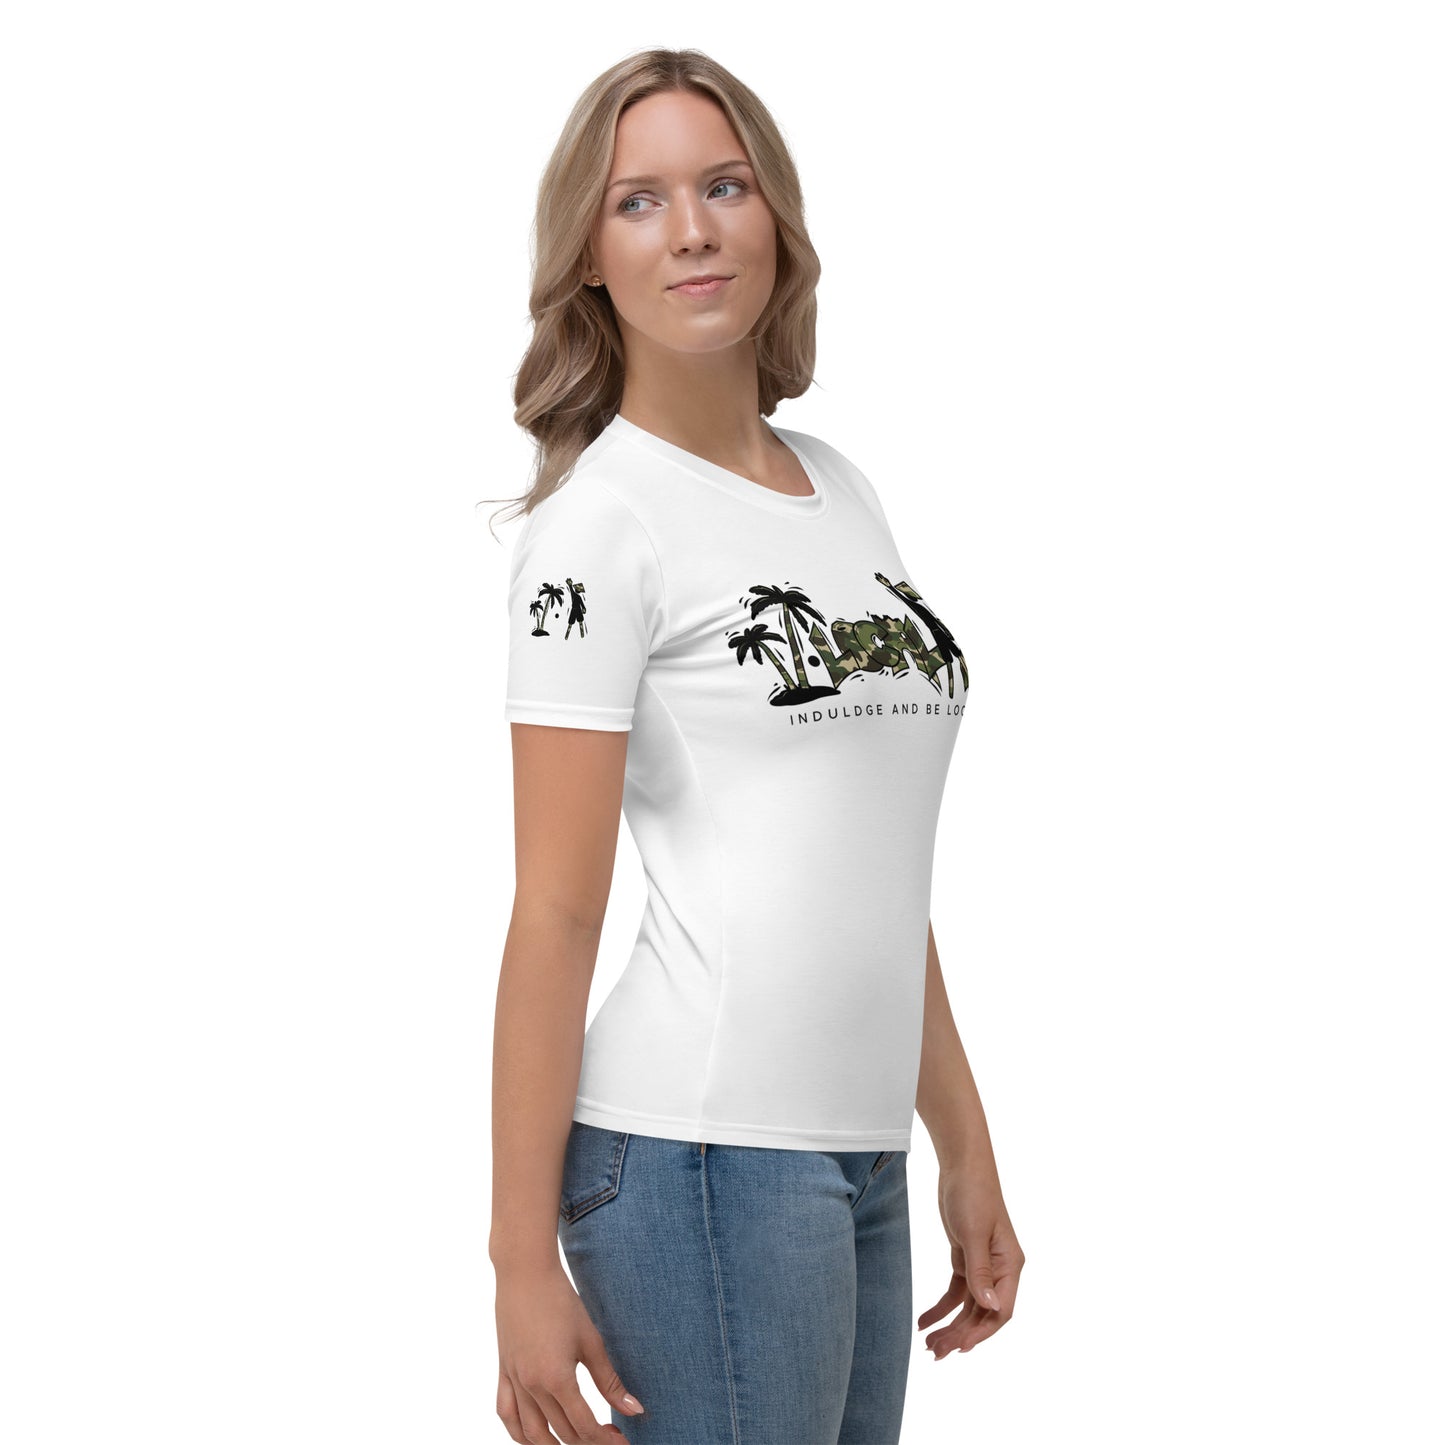 White V.Localized (Camo) Women’s Dry-Fit T-Shirt